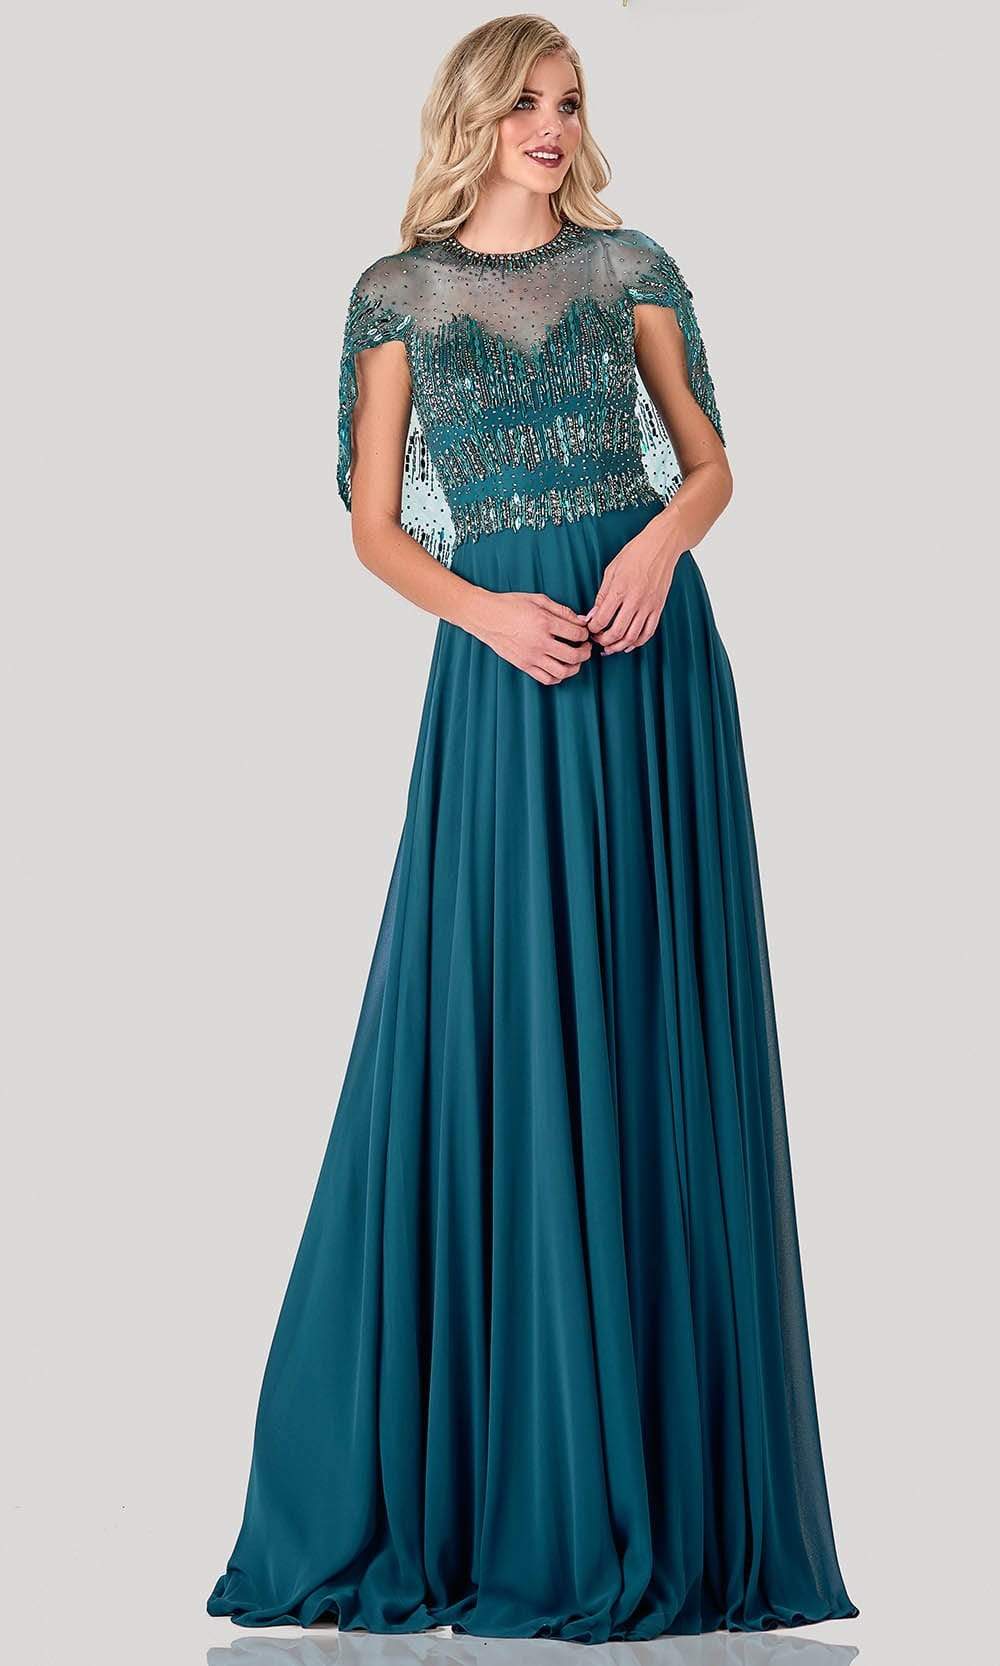 Terani Couture - 2111M5295 Embellished Jewel Neck A-line Gown Special Occasion Dress 00 / Dark Teal